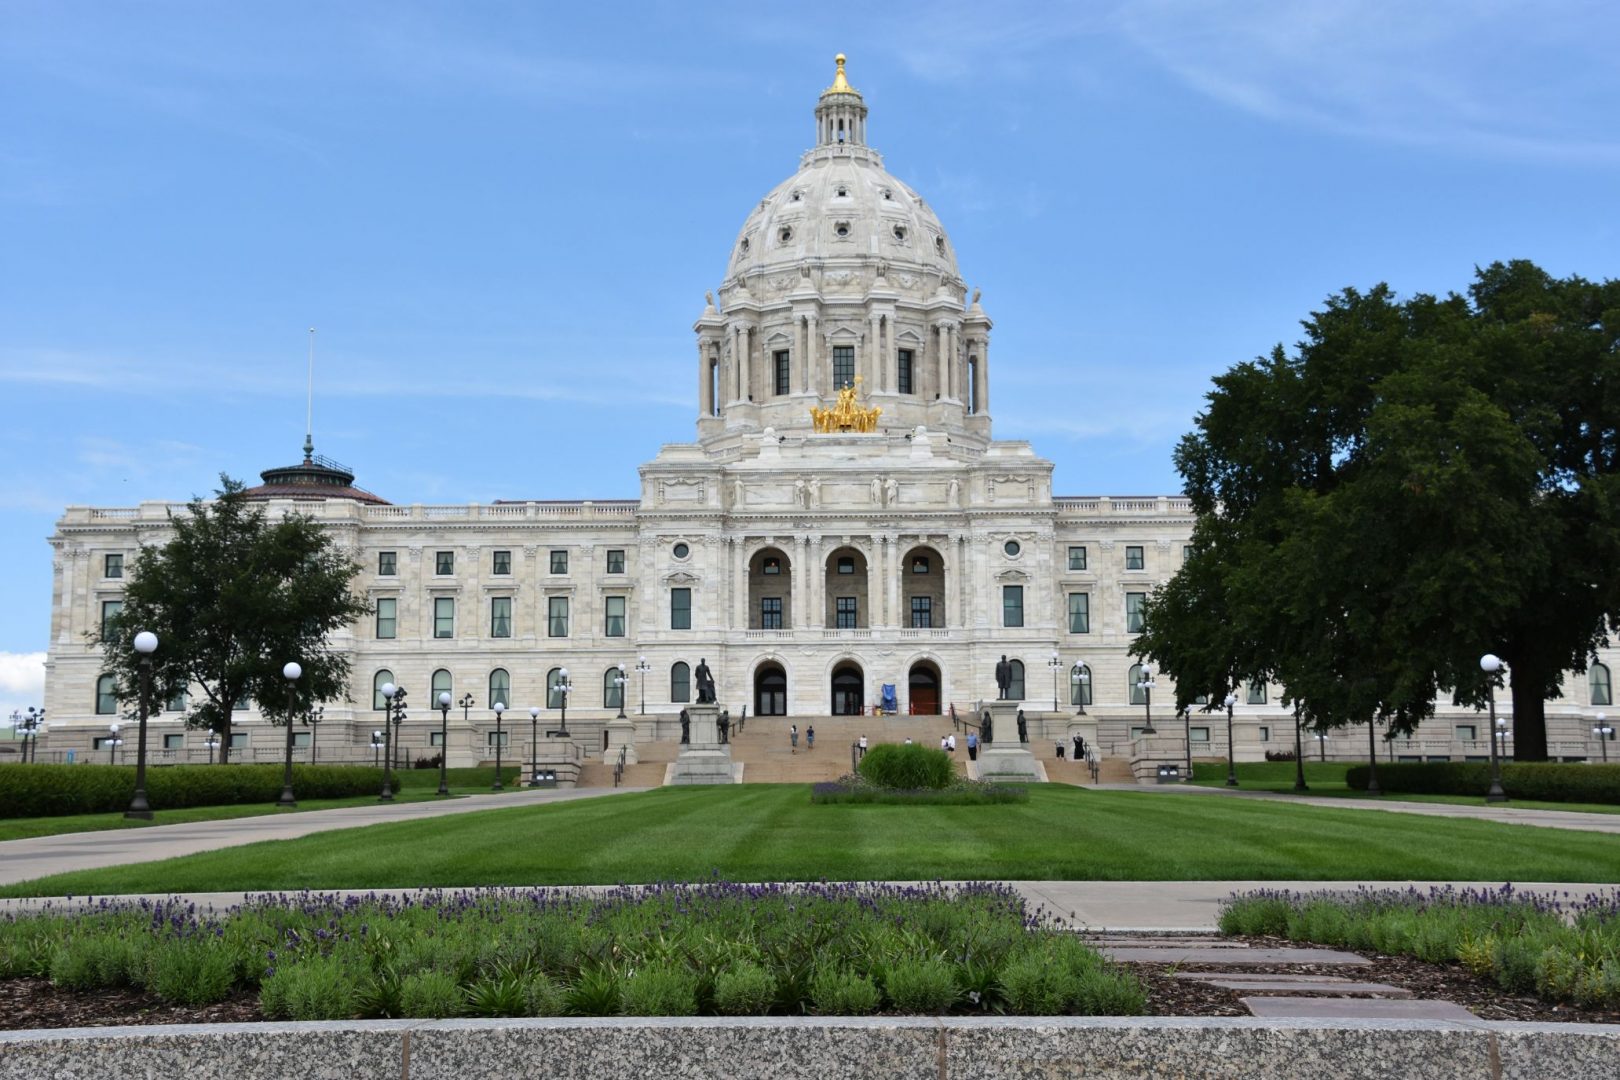 Alt text: The Minnesota State Capitol building with a central dome and gilded quadriga, flanked by green lawn and garden beds, under a partly cloudy sky.